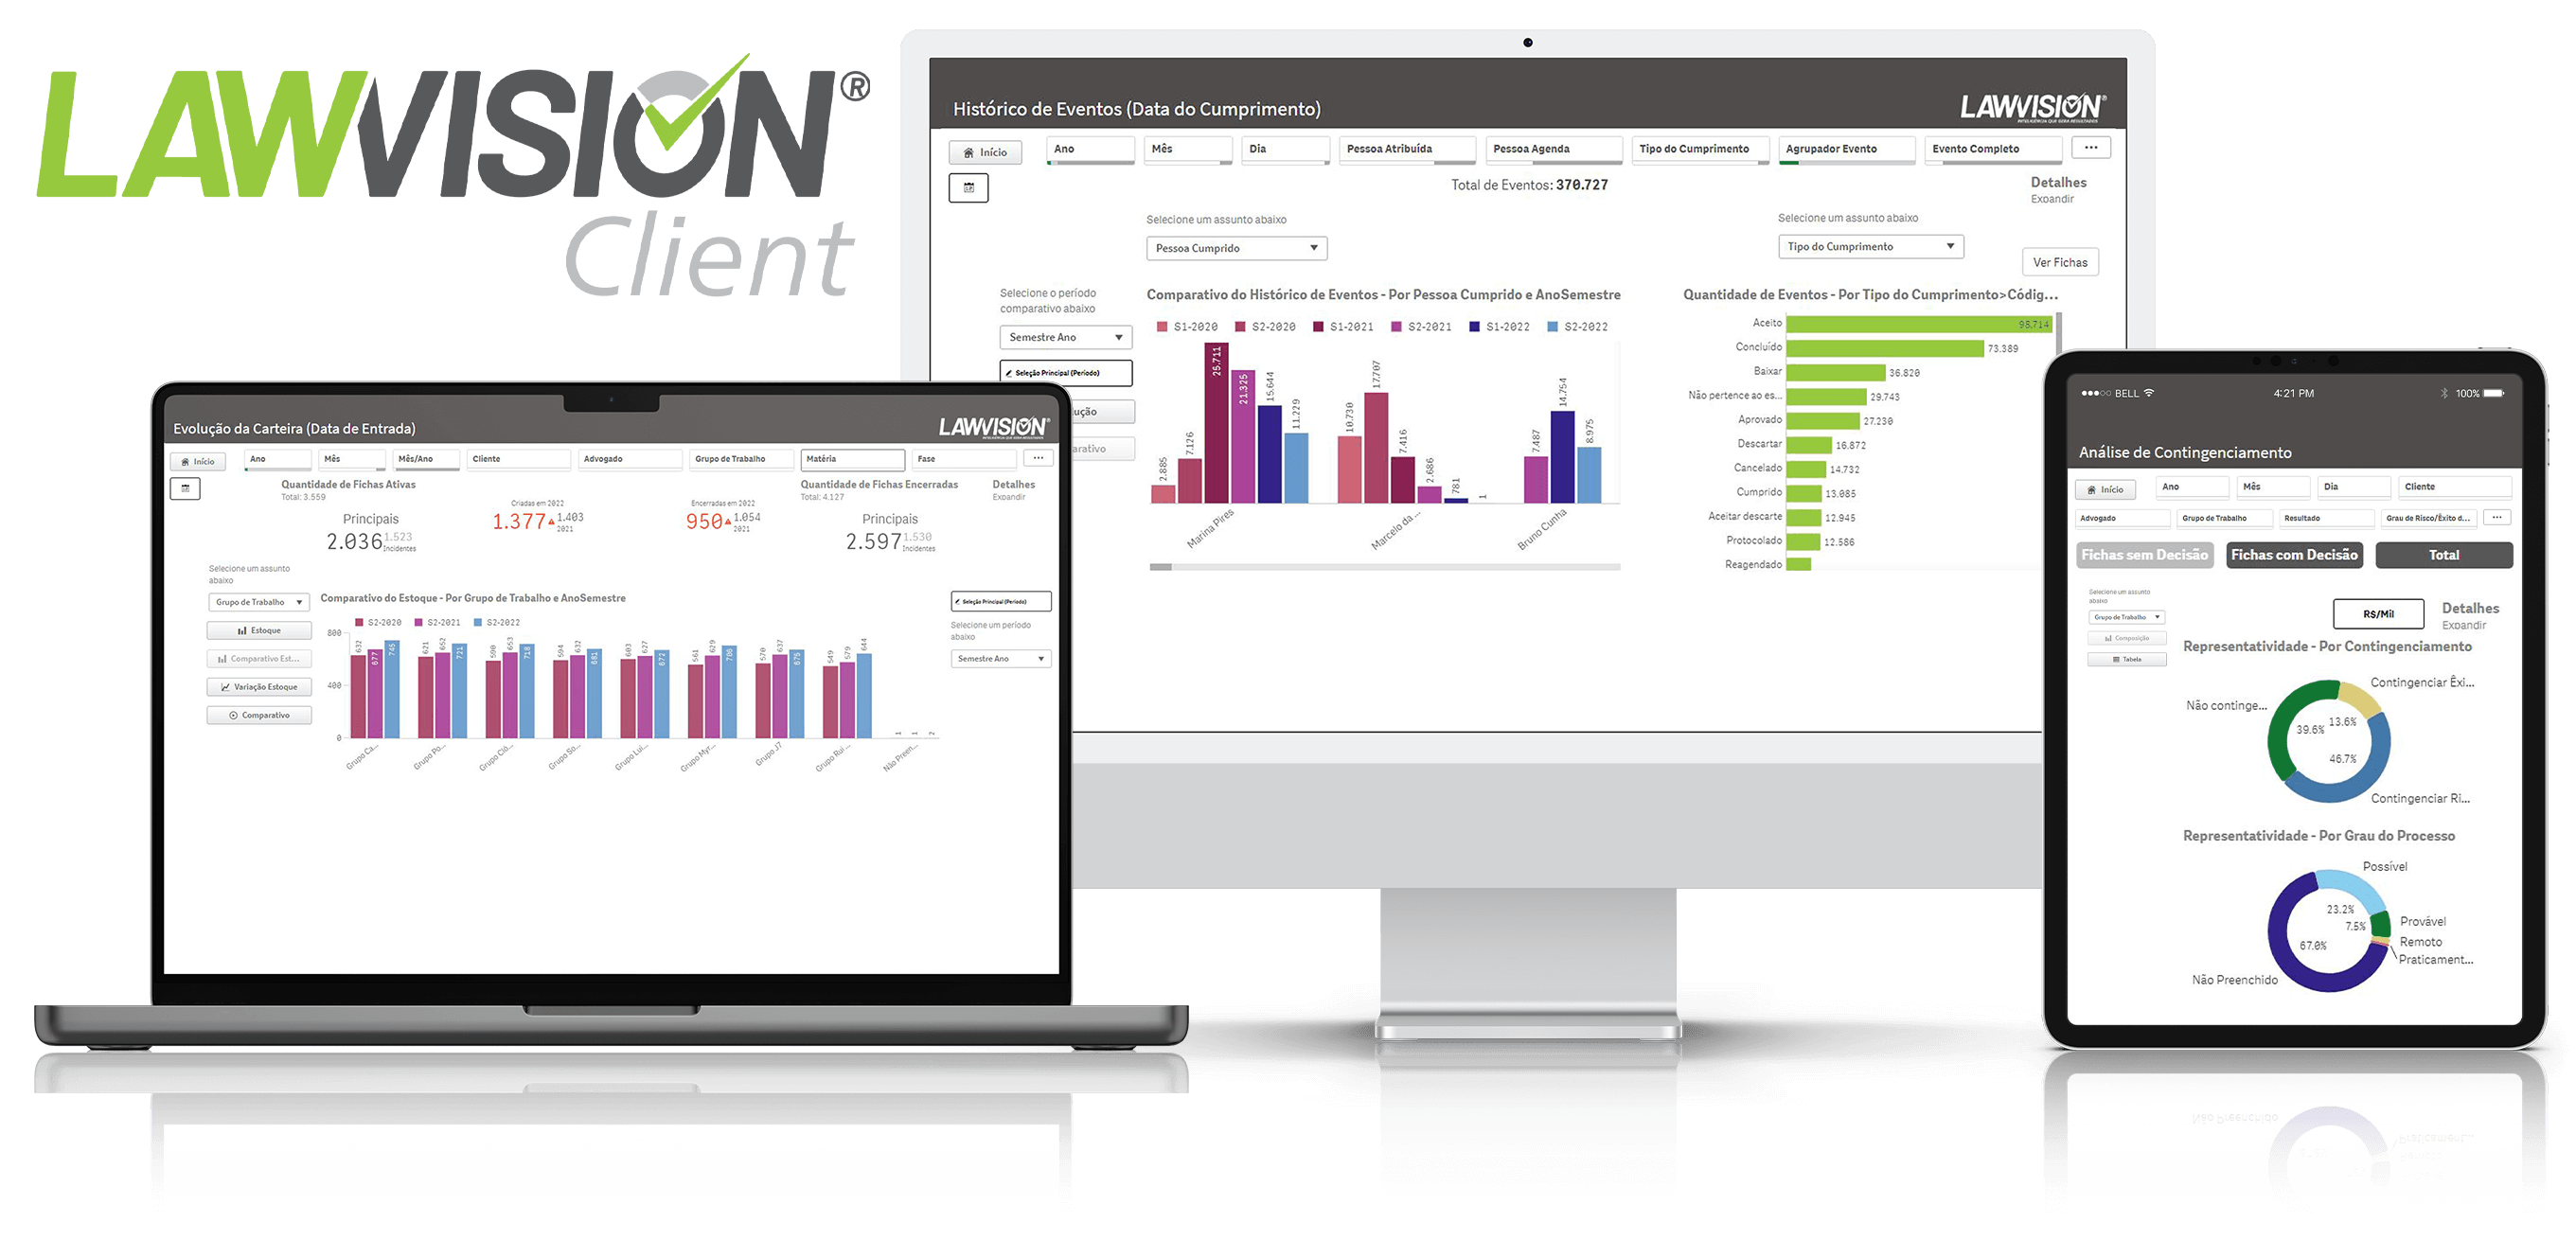 LawVision Client